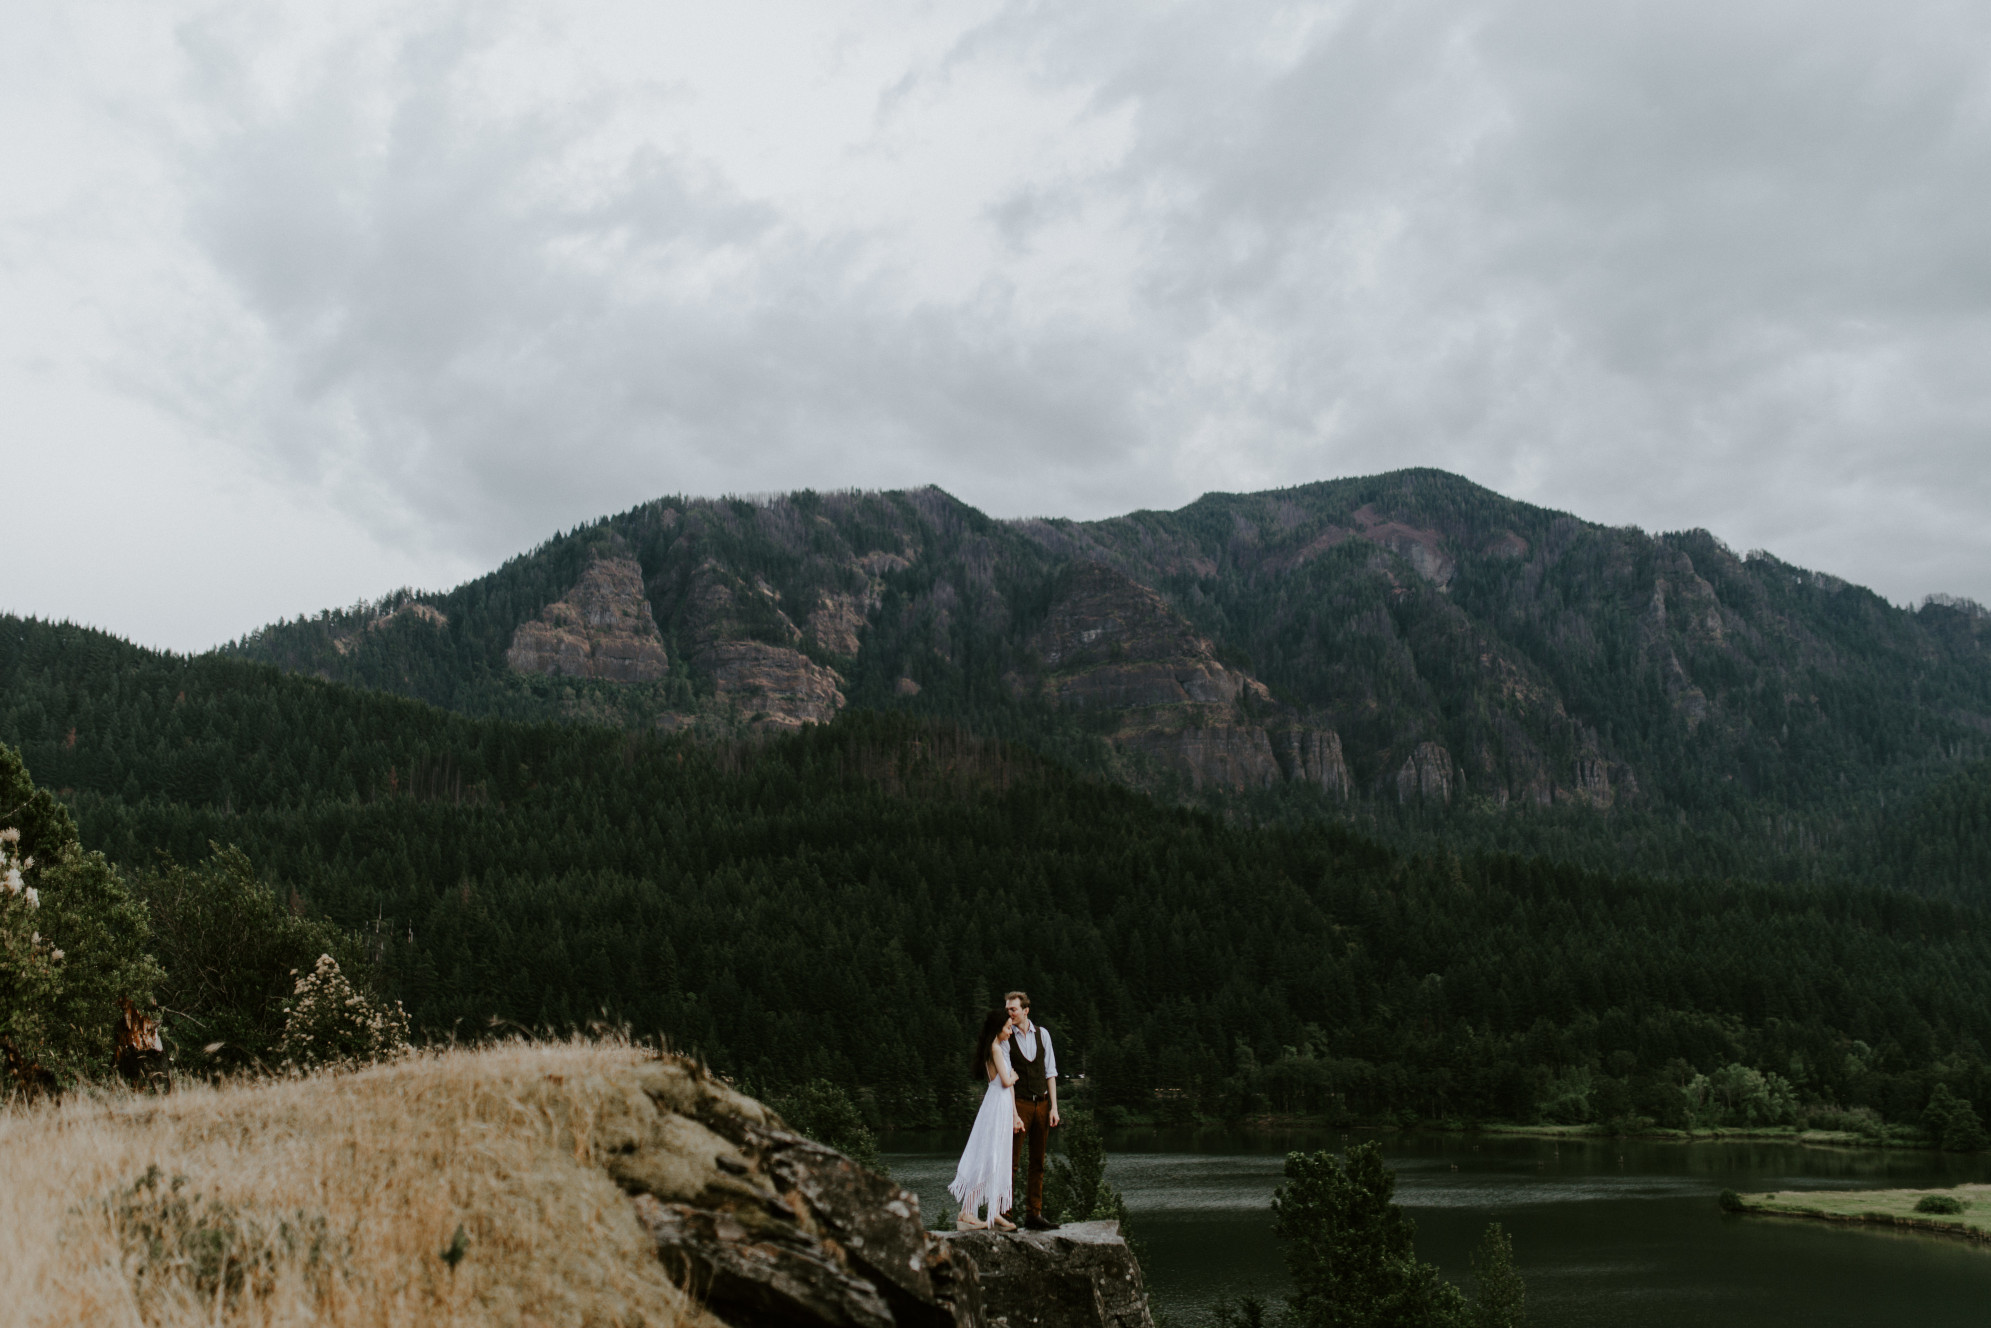 Jacob and Kimberlie stand at the edge of a cliff. Elopement wedding photography at Cascade Locks by Sienna Plus Josh.